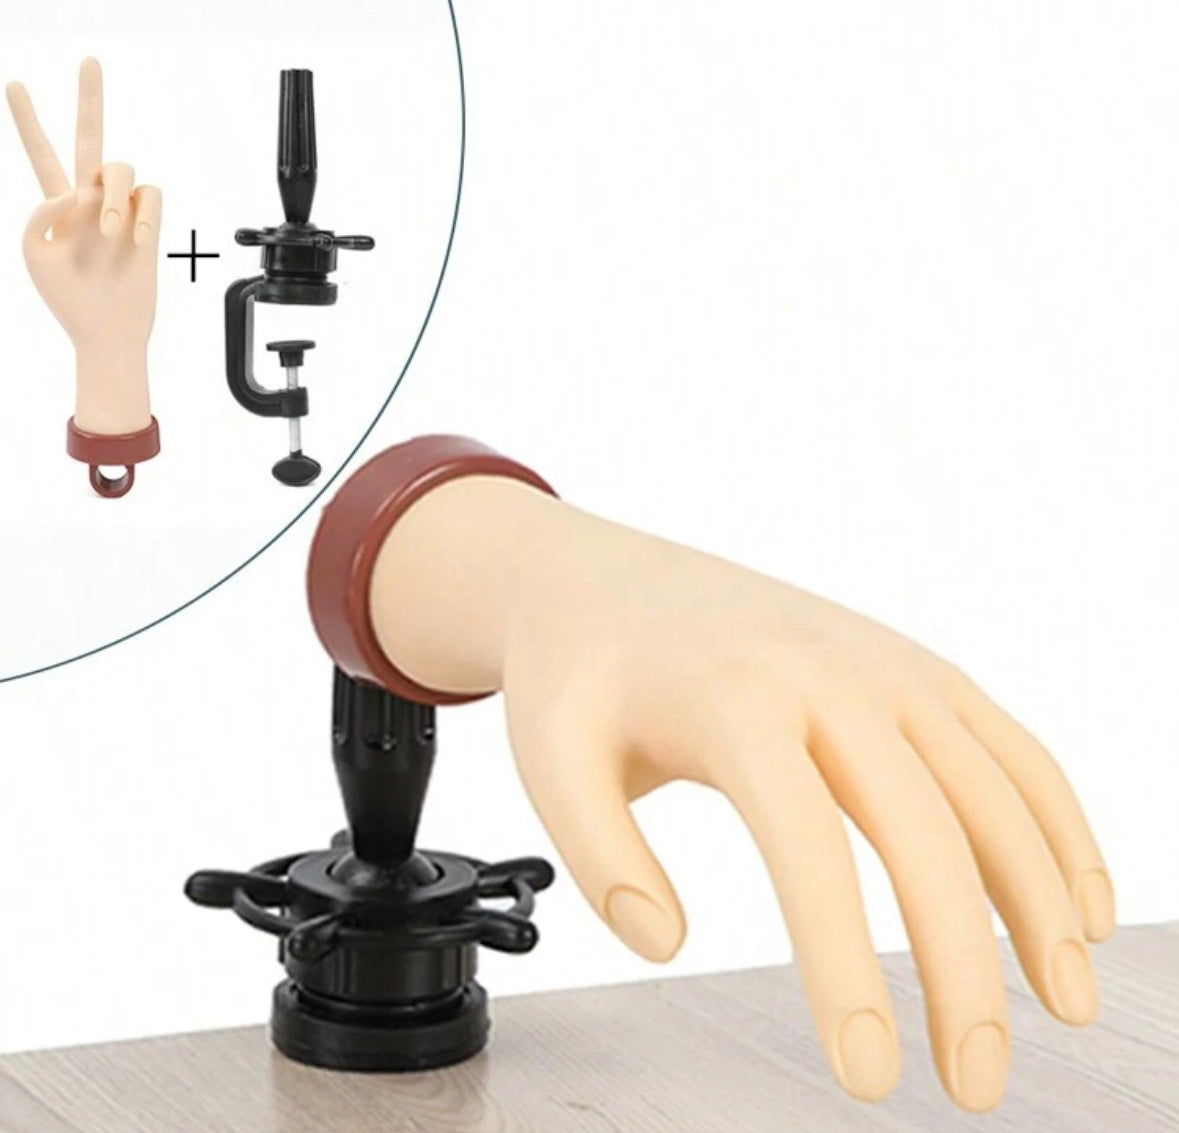 Flexible Silicone Practice Model Hand with Holder